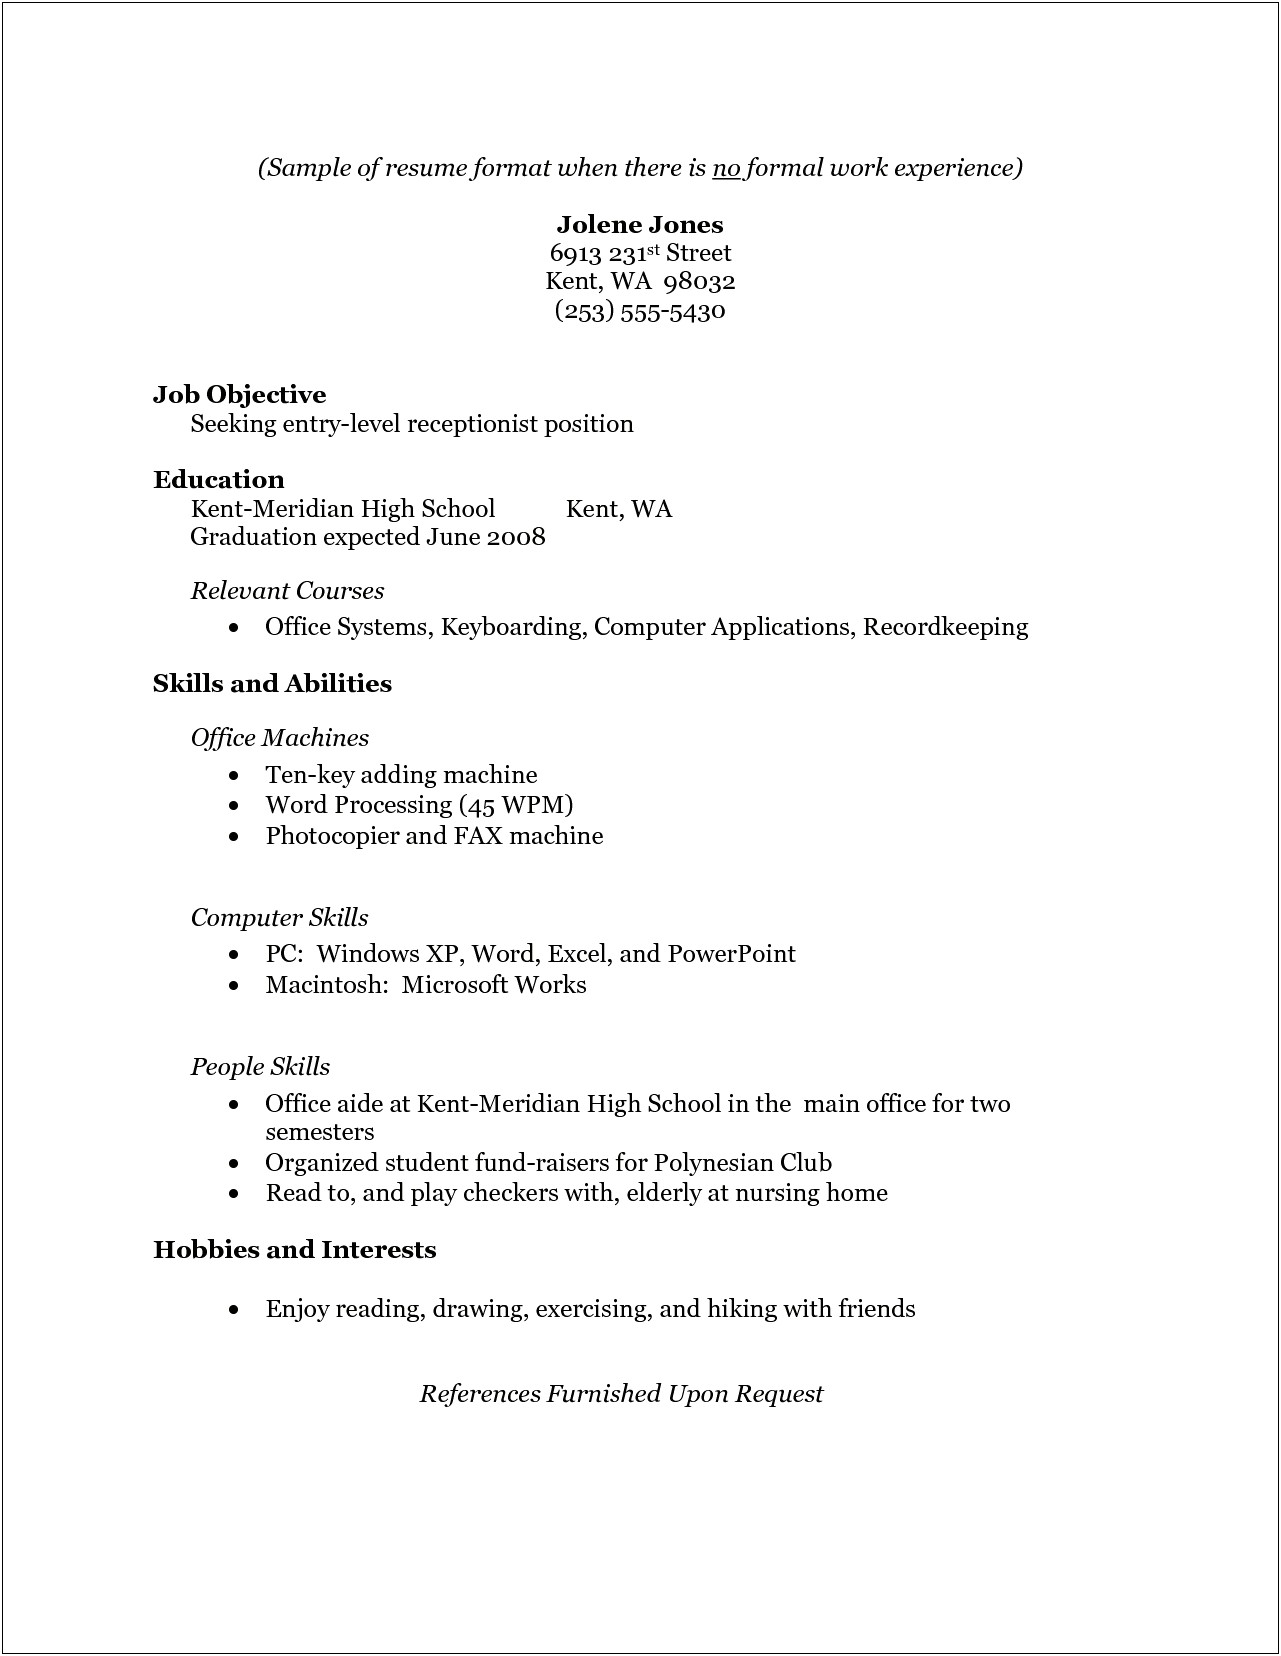 Resume Objectives For No Job Experience